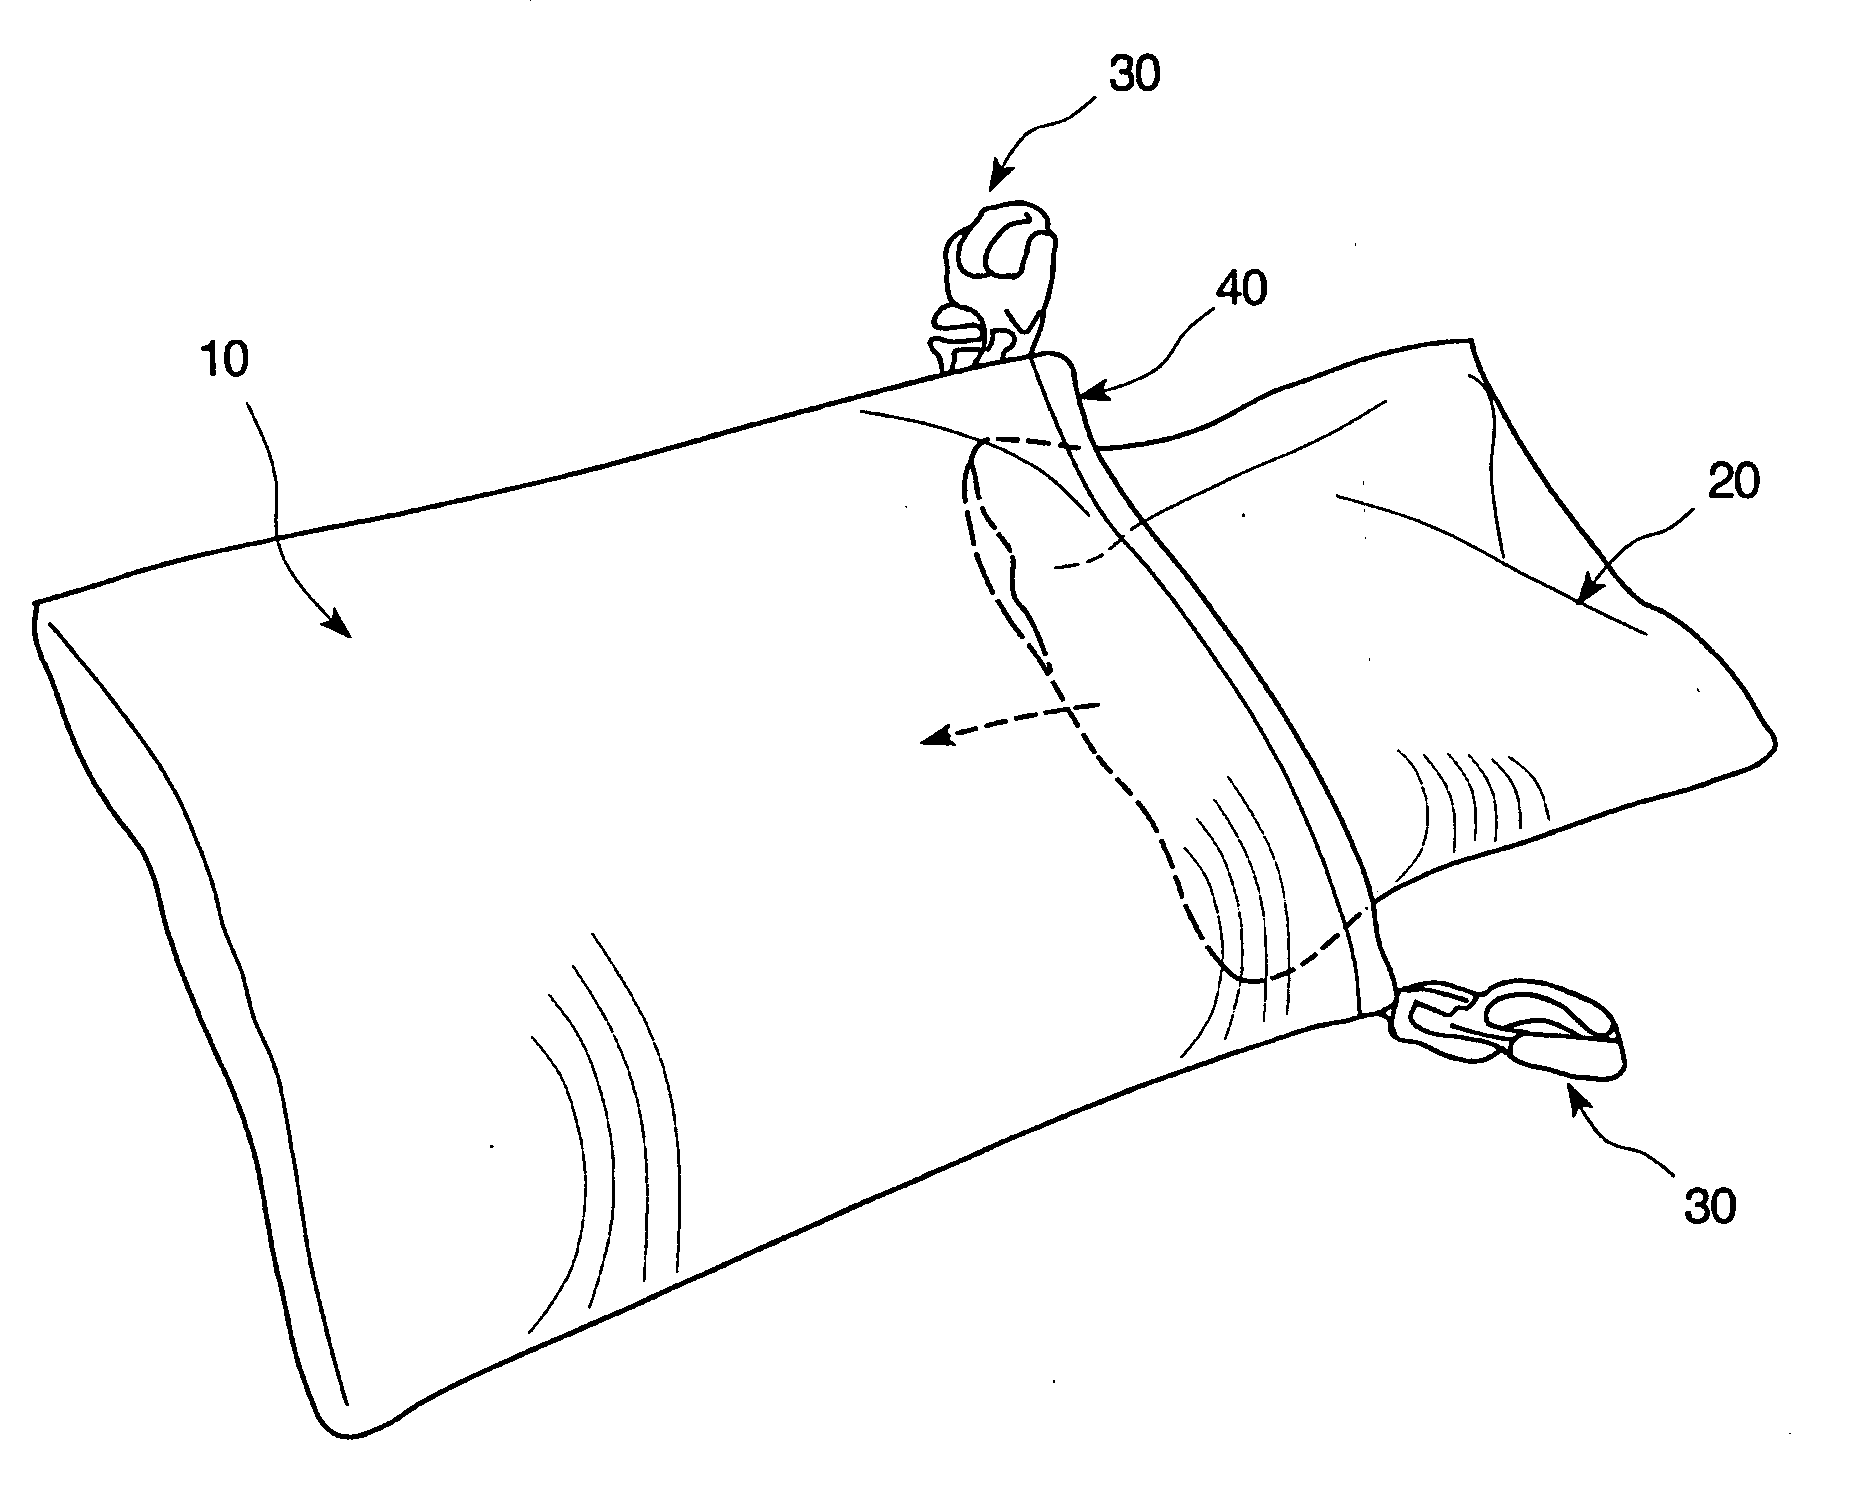 Apparatus and method for applying cooling substances to pressure points in the human body